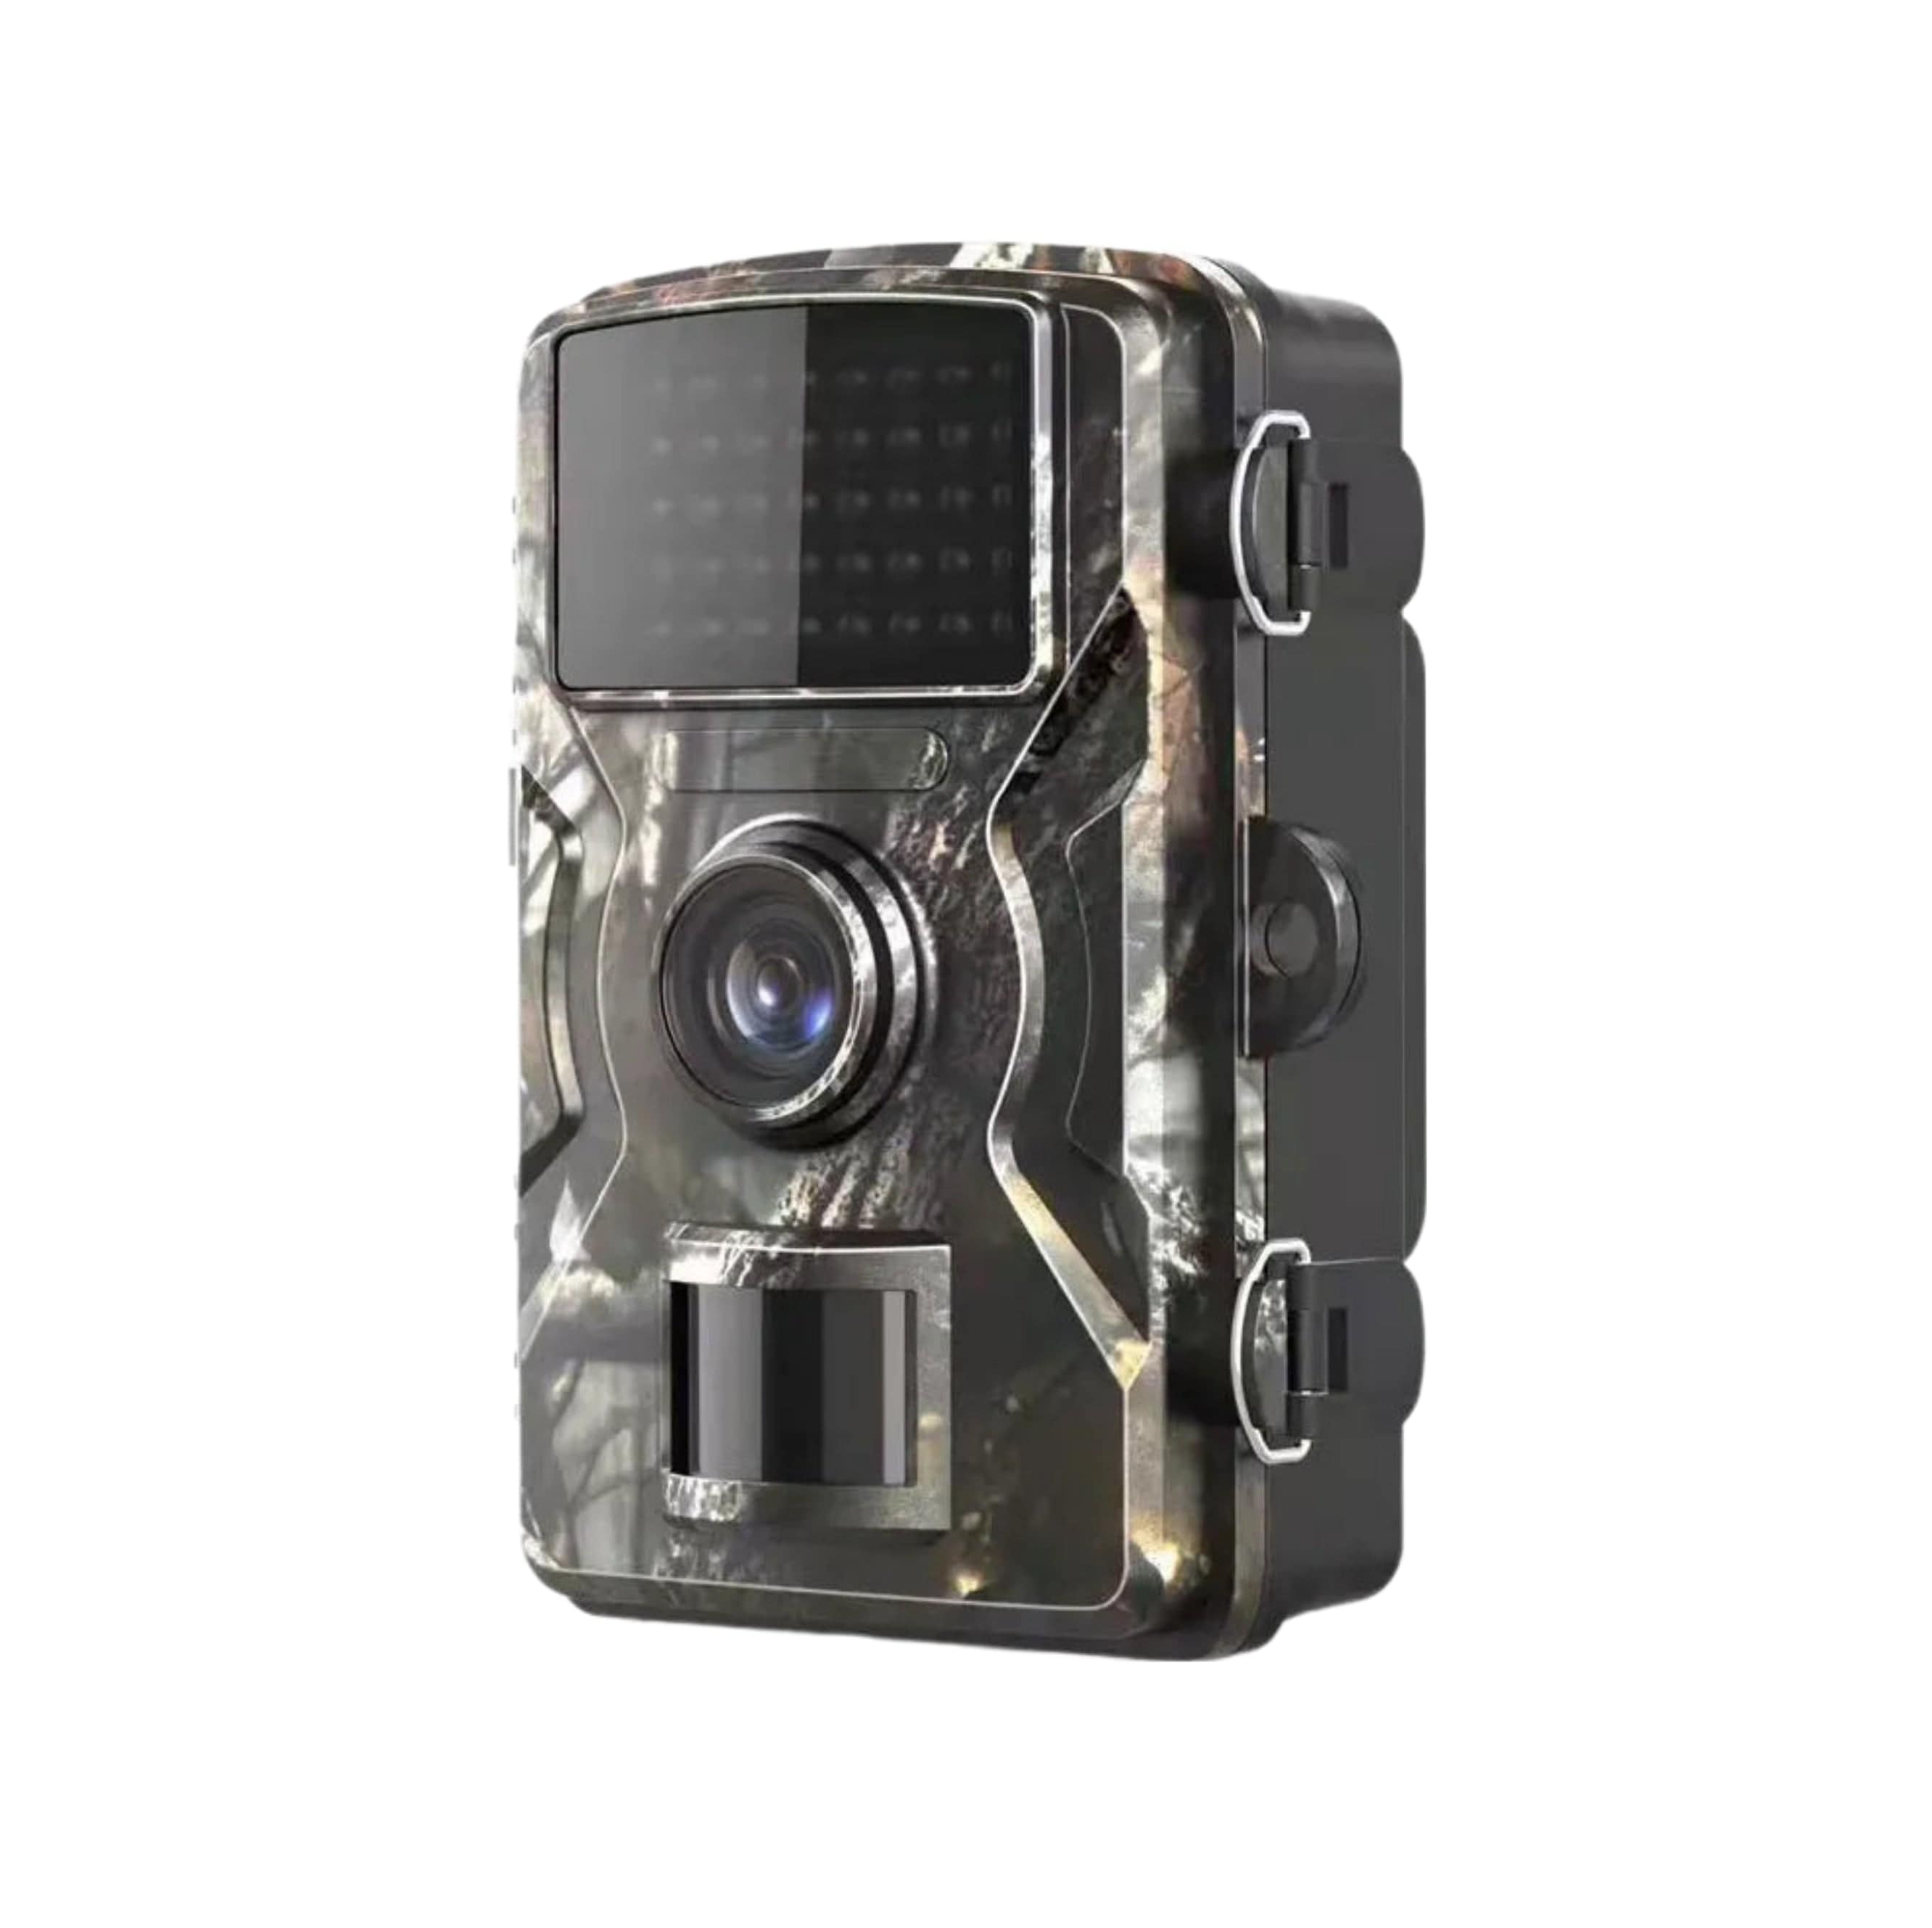 16MP 1080P Outdoor Wildlife Camera, Infrared Night Vision Cam, Waterproof Photo Trap